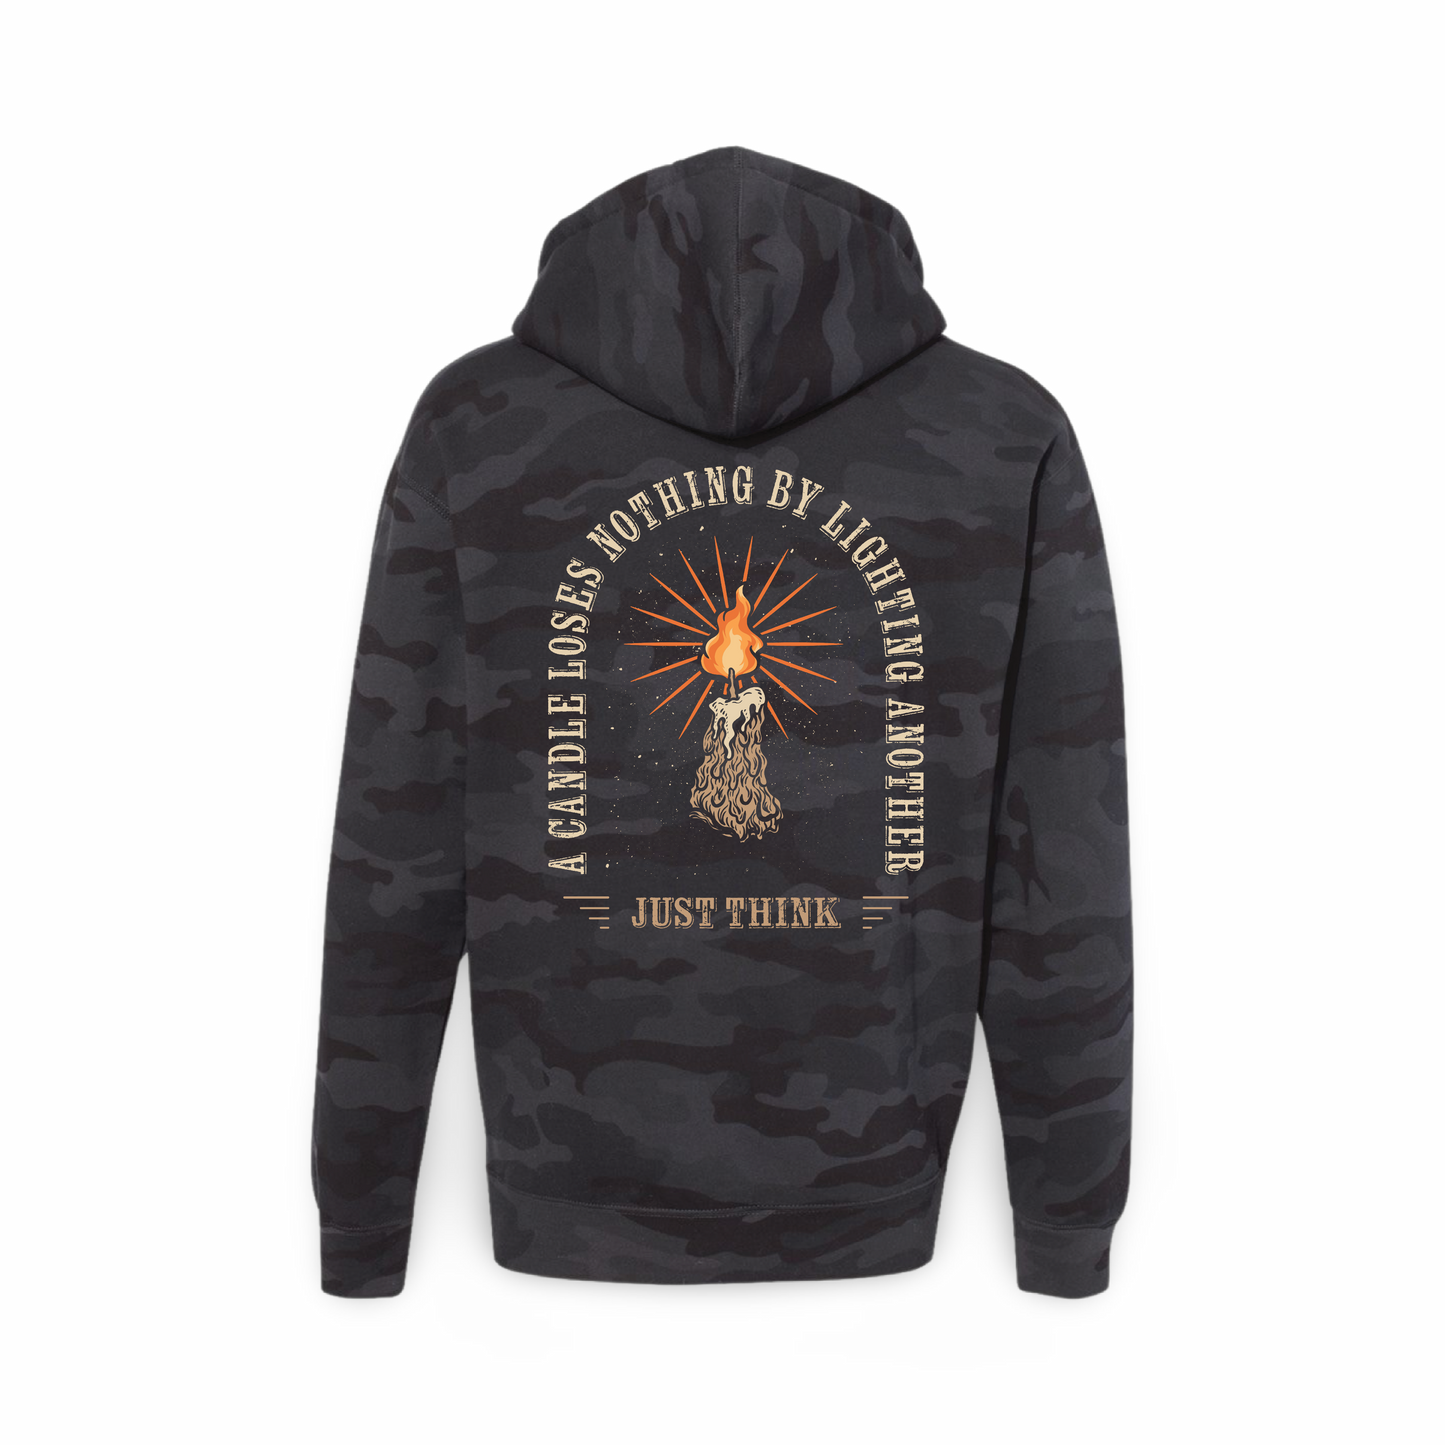 A Light Is All It Takes (Premium Hoodie)